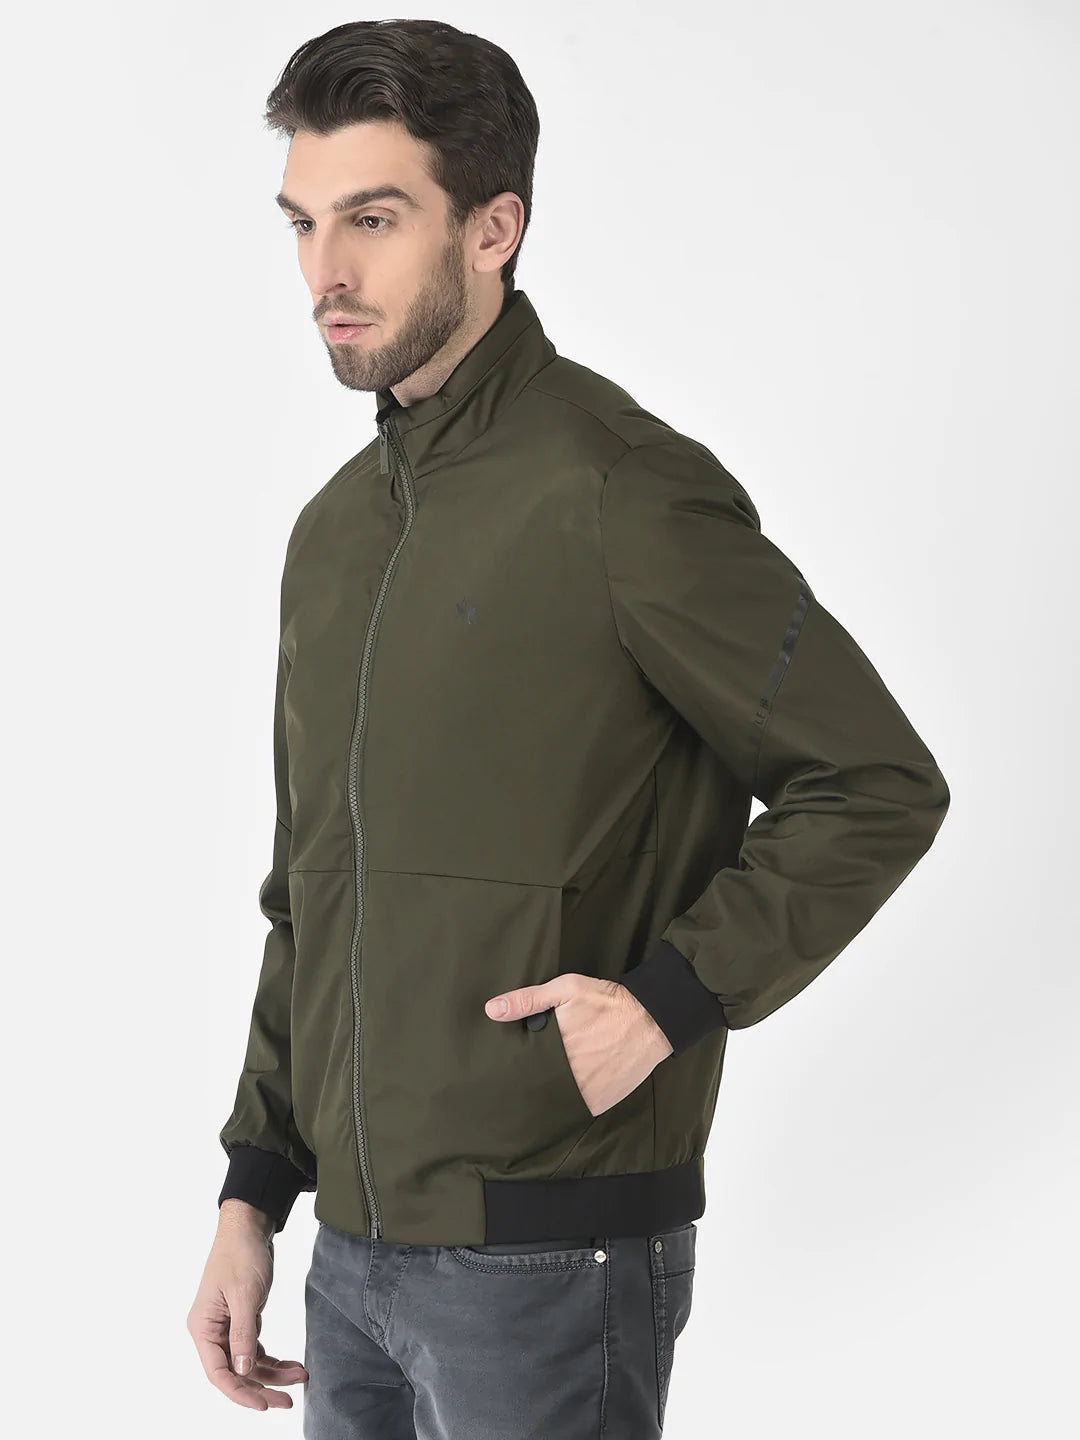 Buy Olive Green Bomber Jacket for Men Online in India -Beyoung